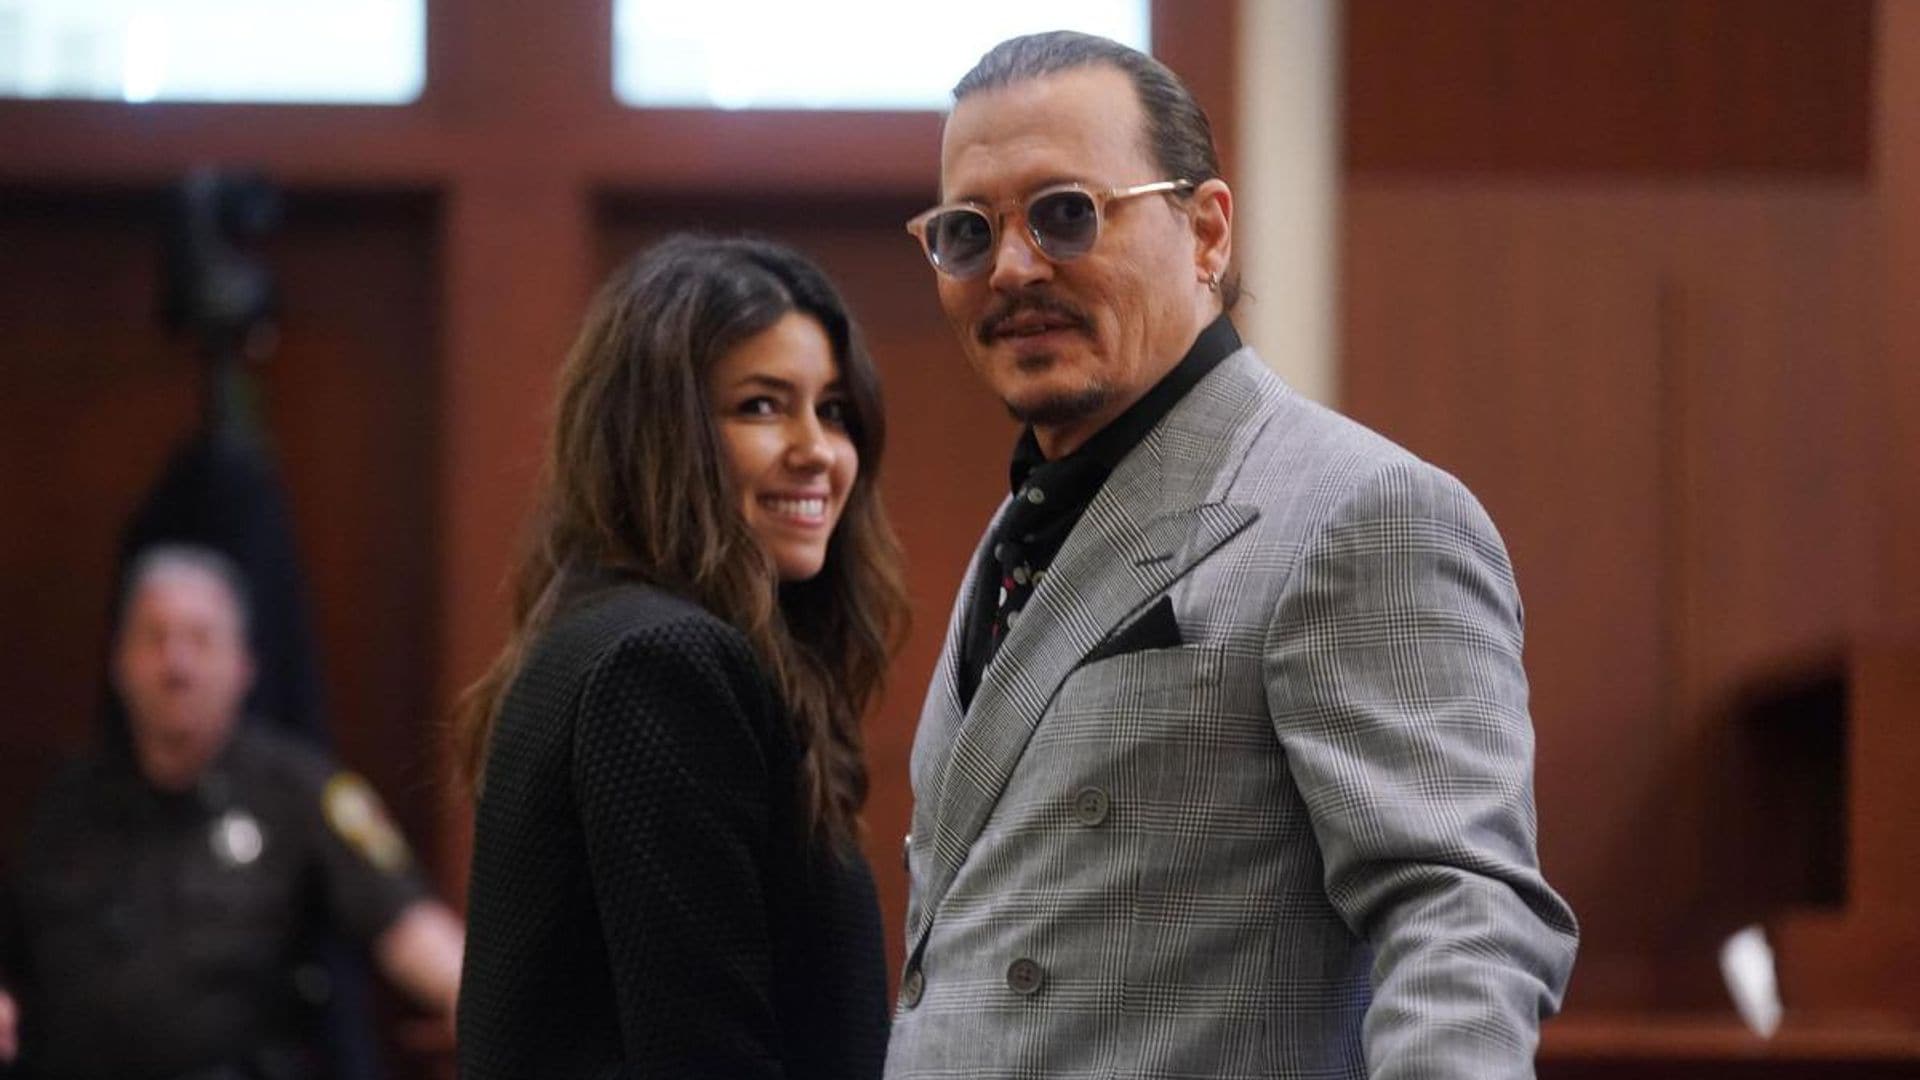 Johnny Depp’s lawyer Camille Vasquez has been elevated to partner at Brown Rudnick